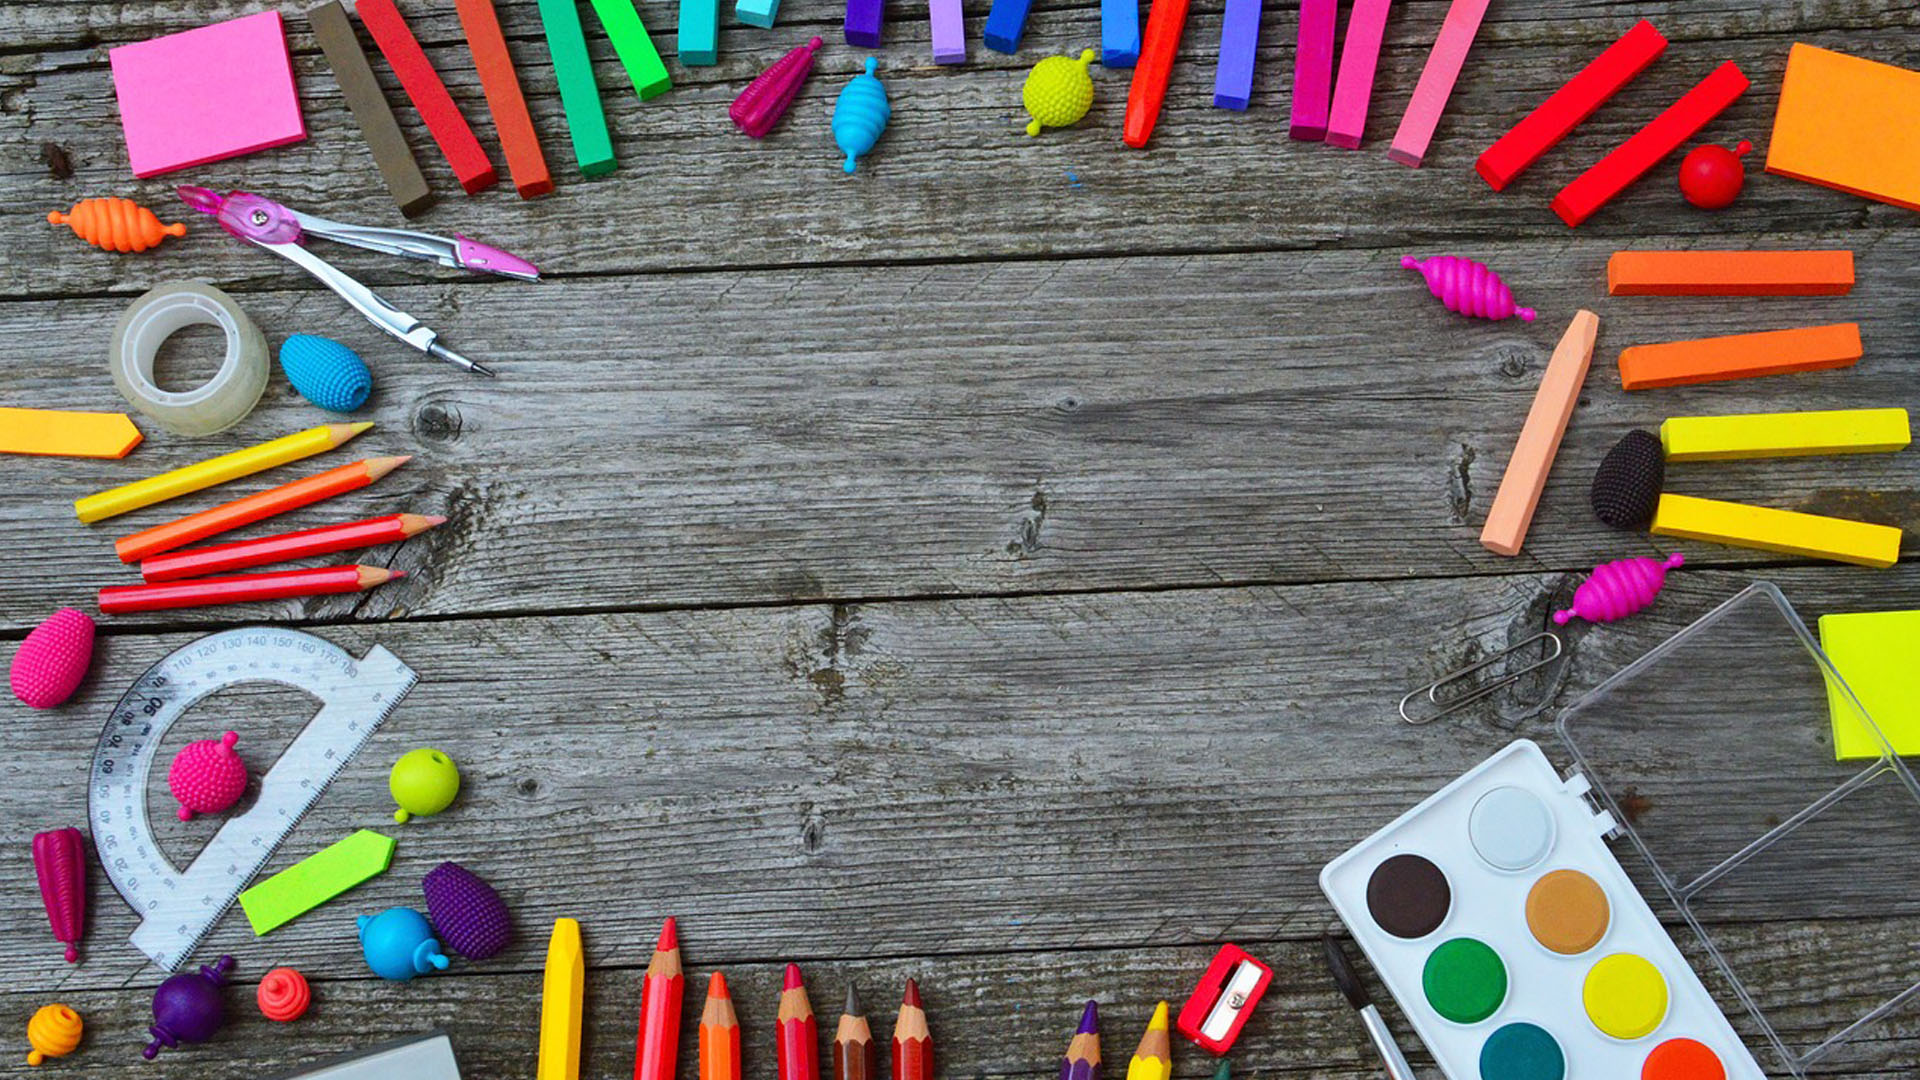 a photo of different colored school supplies ringing around the edges of the image. All of these items are sitting on a wooden porch. Some of the different items include: oil pastels, colored pencils, a paperclips, a compas, a few sticky notes.